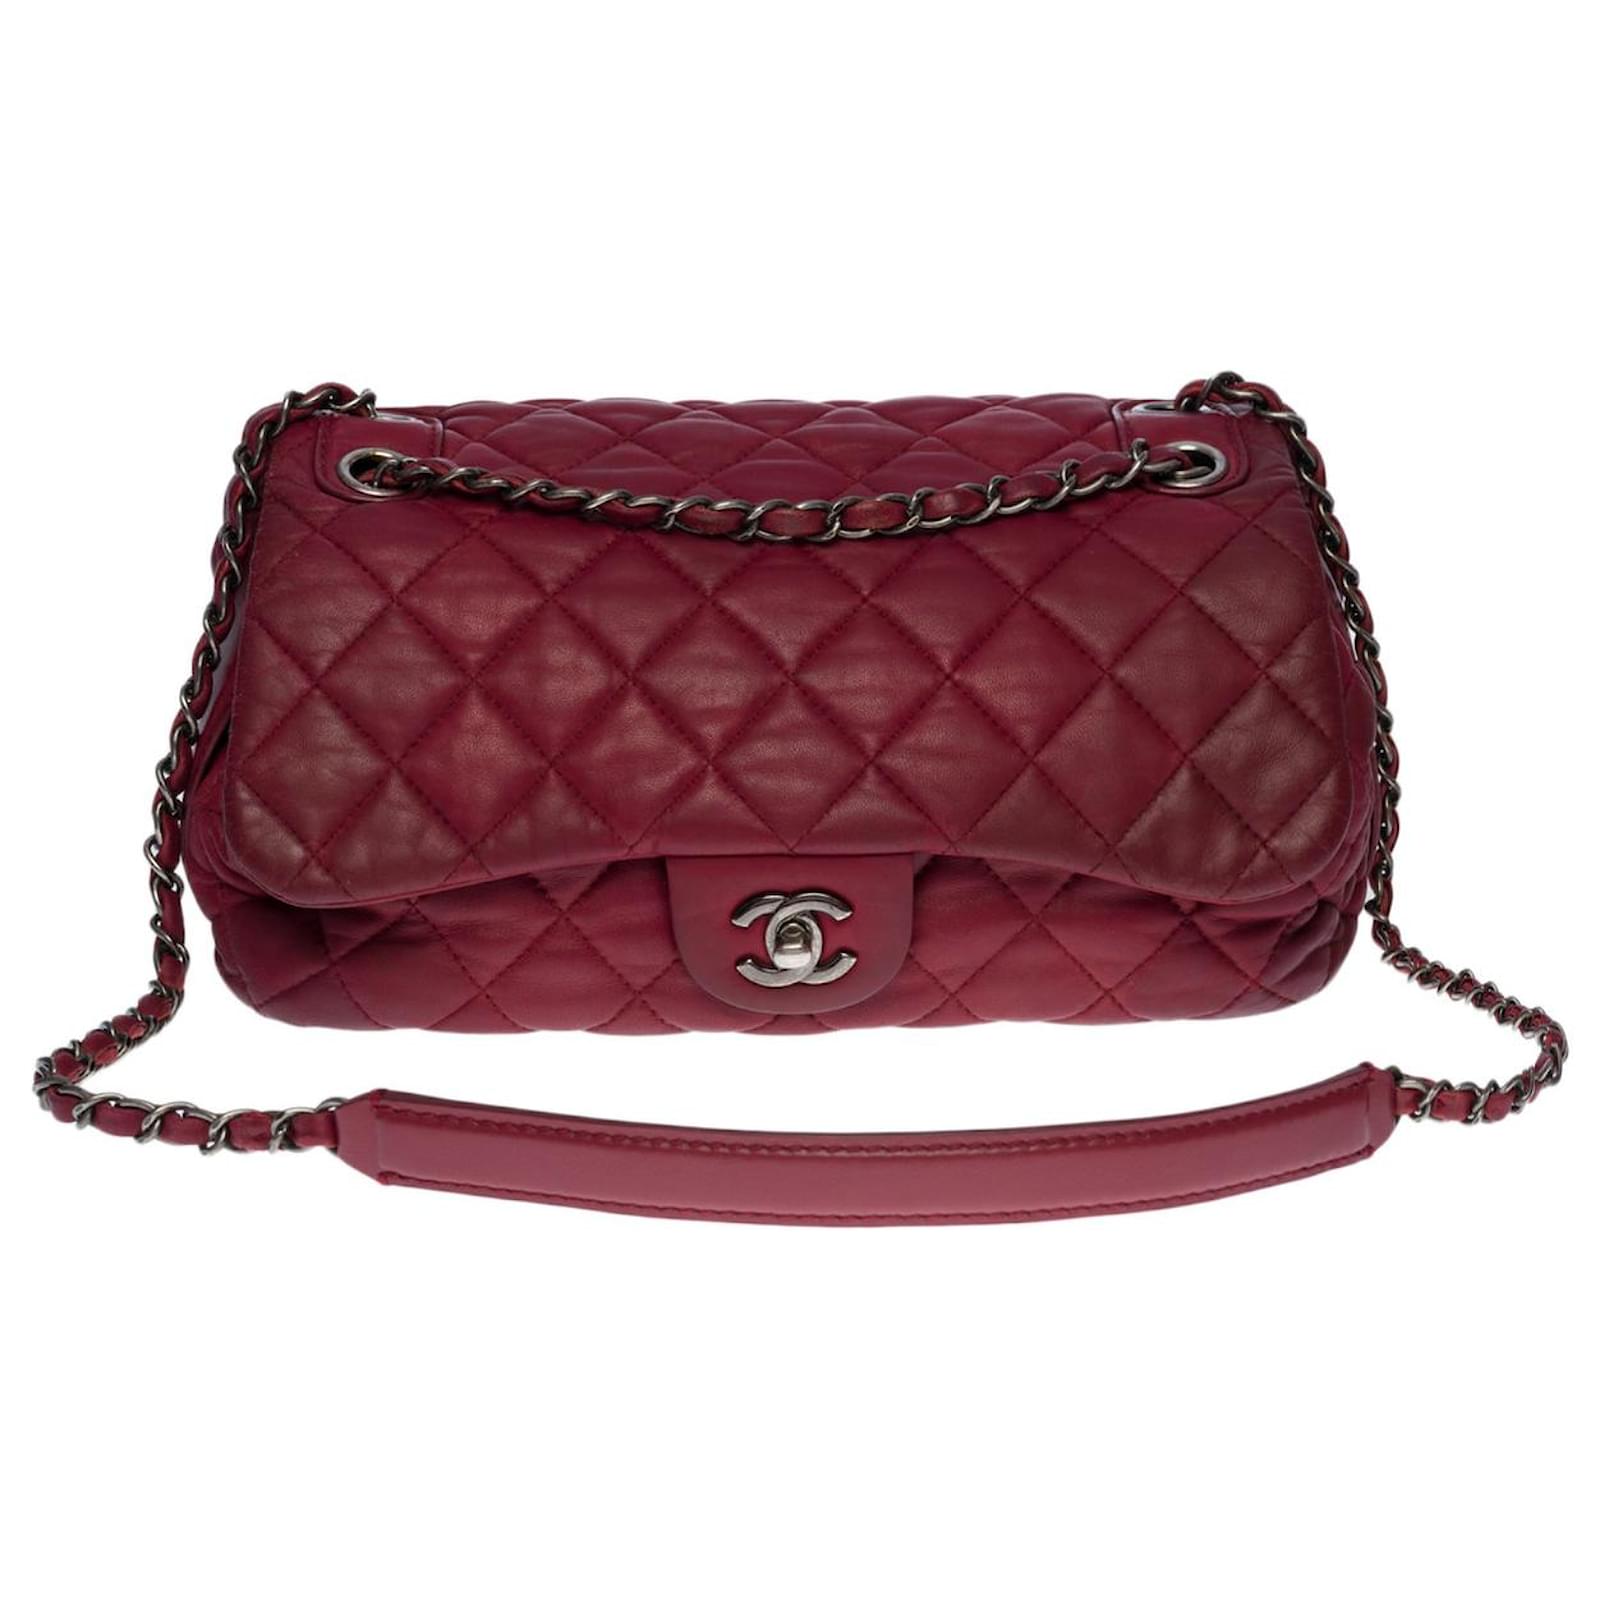 Timeless/classique leather crossbody bag Chanel Red in Leather - 32010815